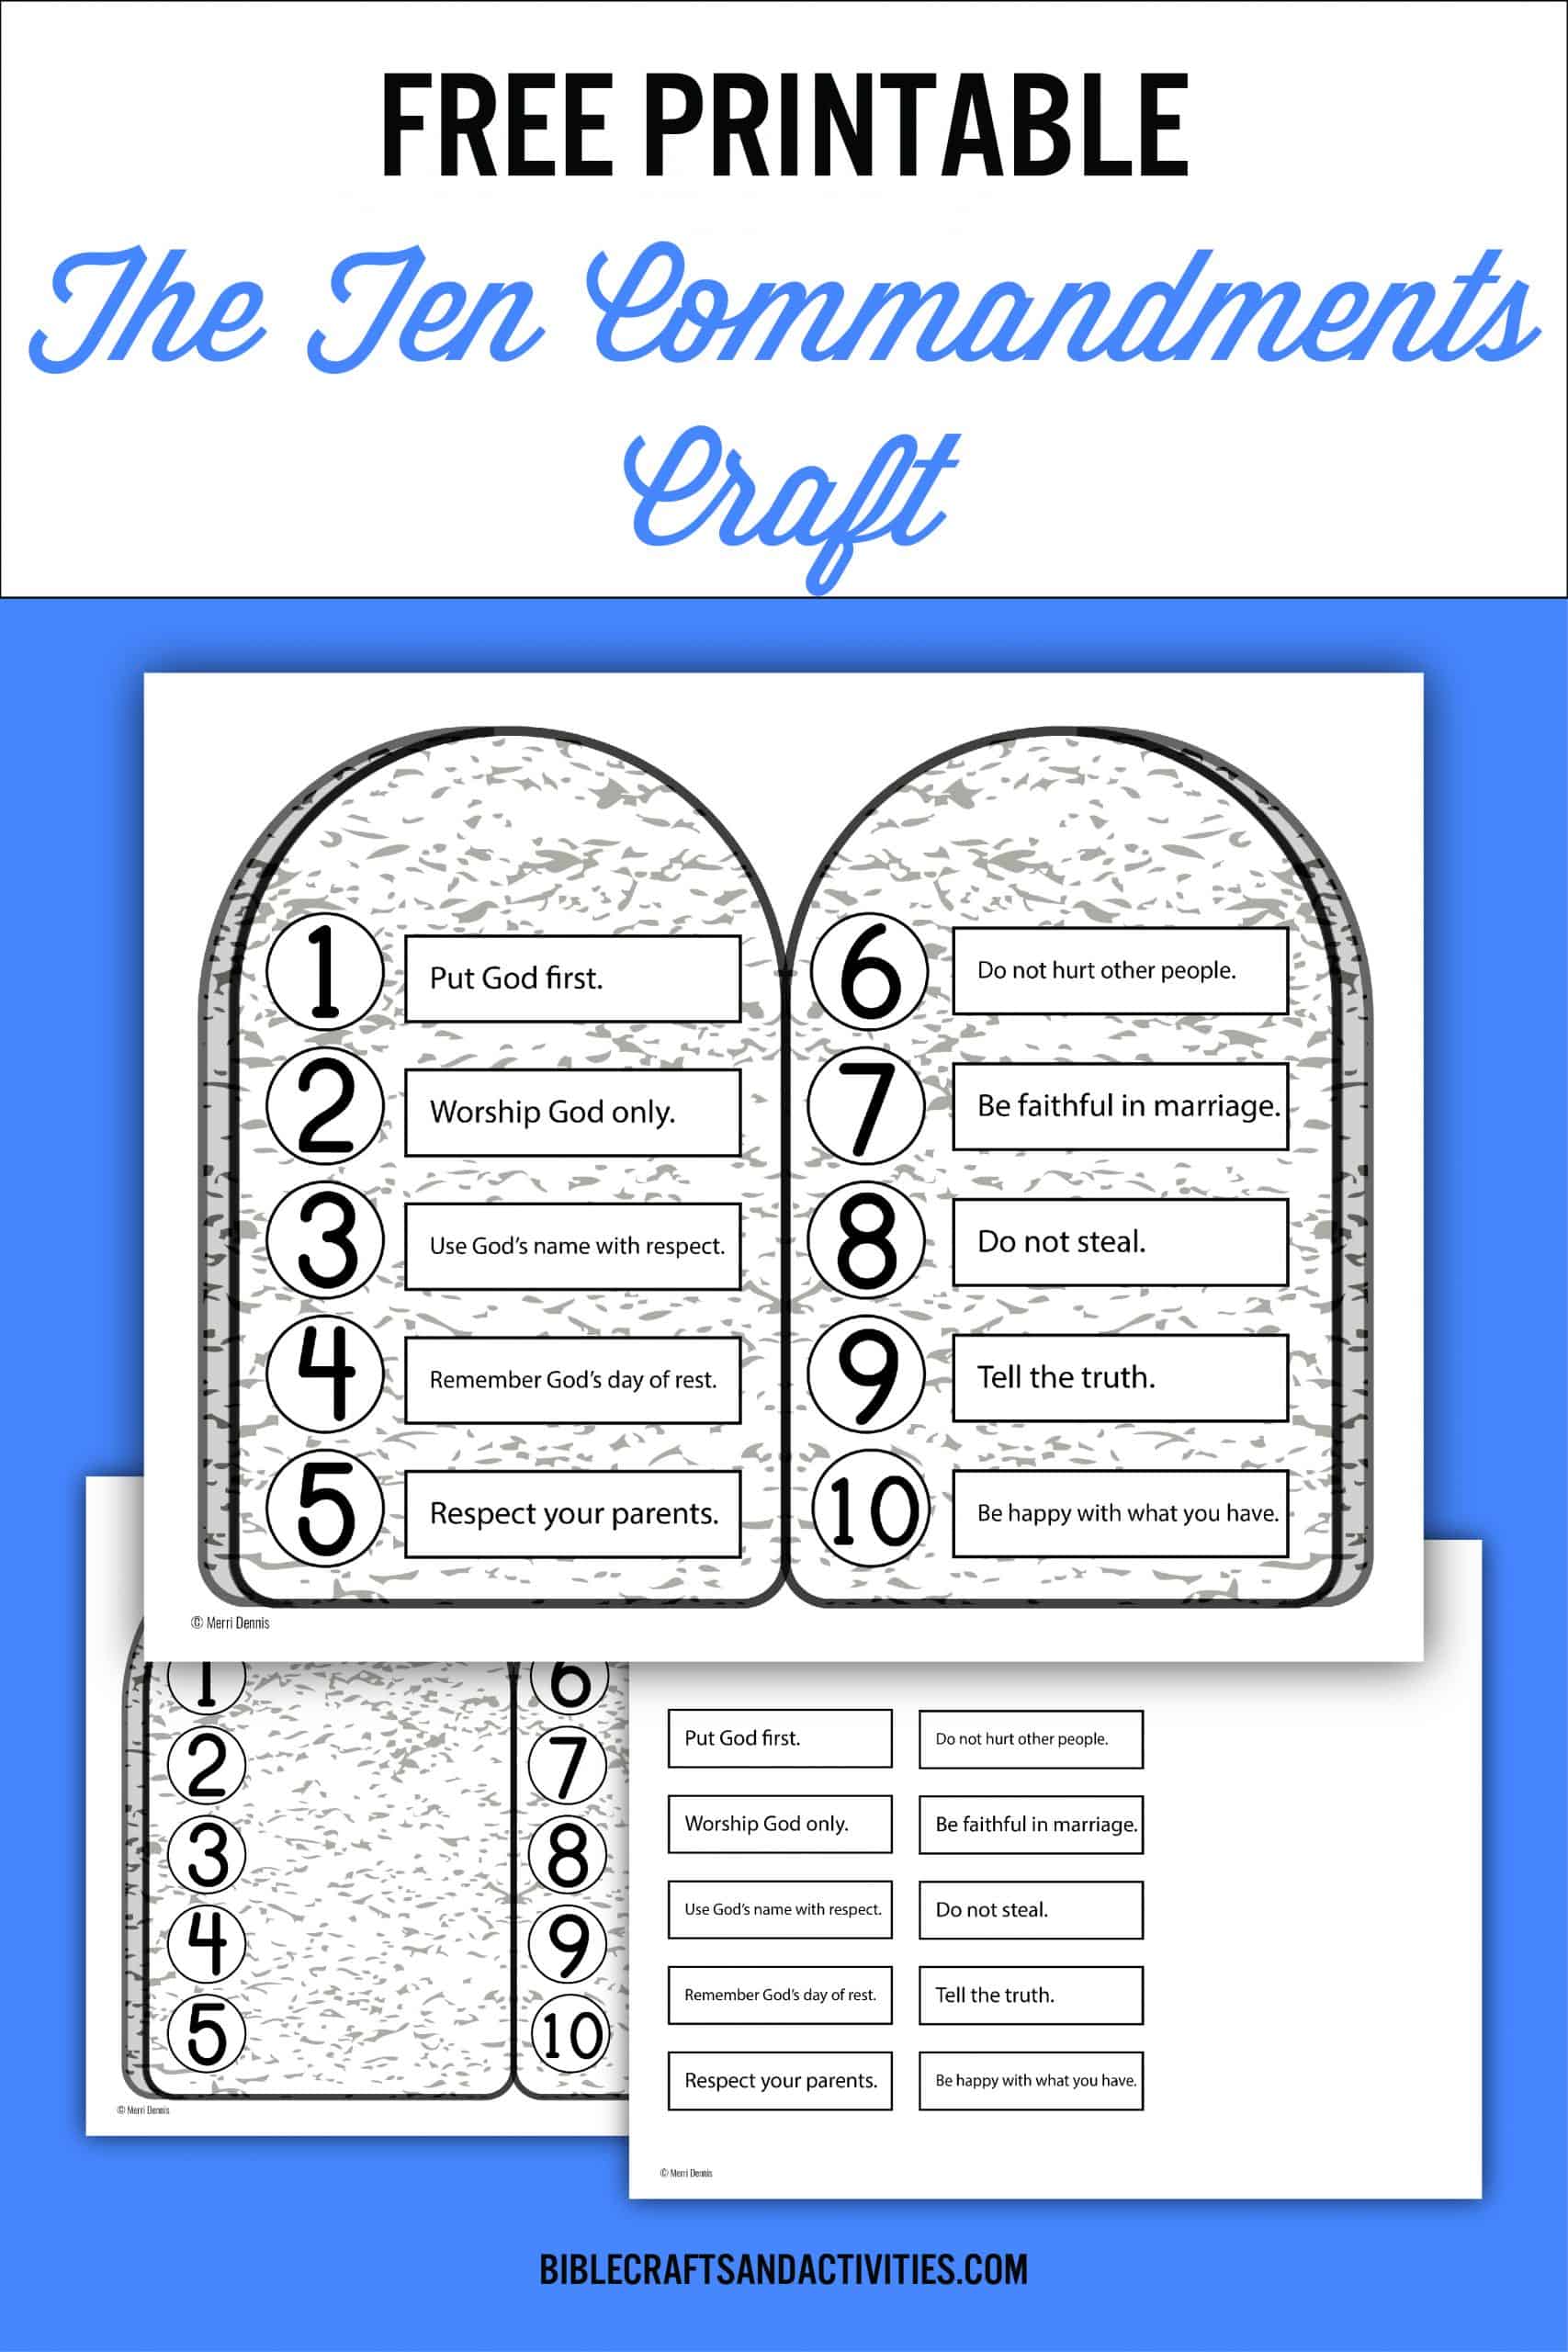 14-best-images-of-free-printable-10-commandments-worksheets-free-images-and-photos-finder